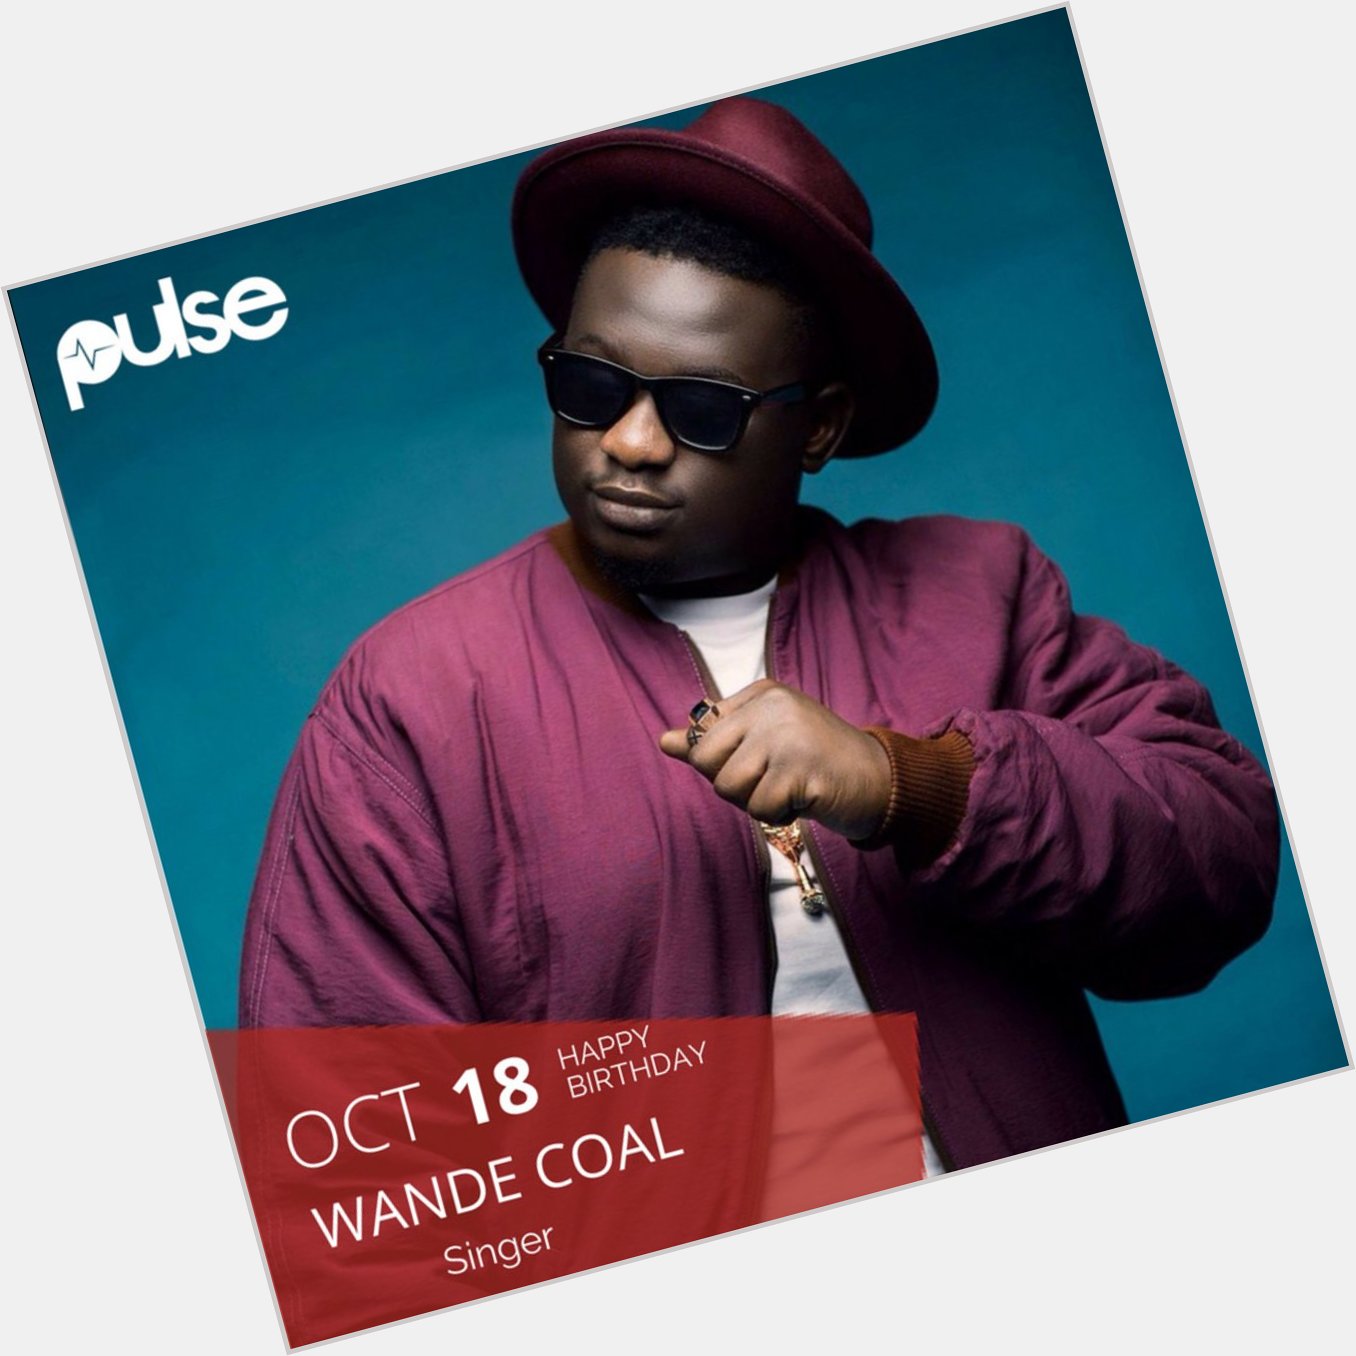 Happy birthday, Wande Coal! We wish you long life and prosperity. Much love from the Pulse team. 